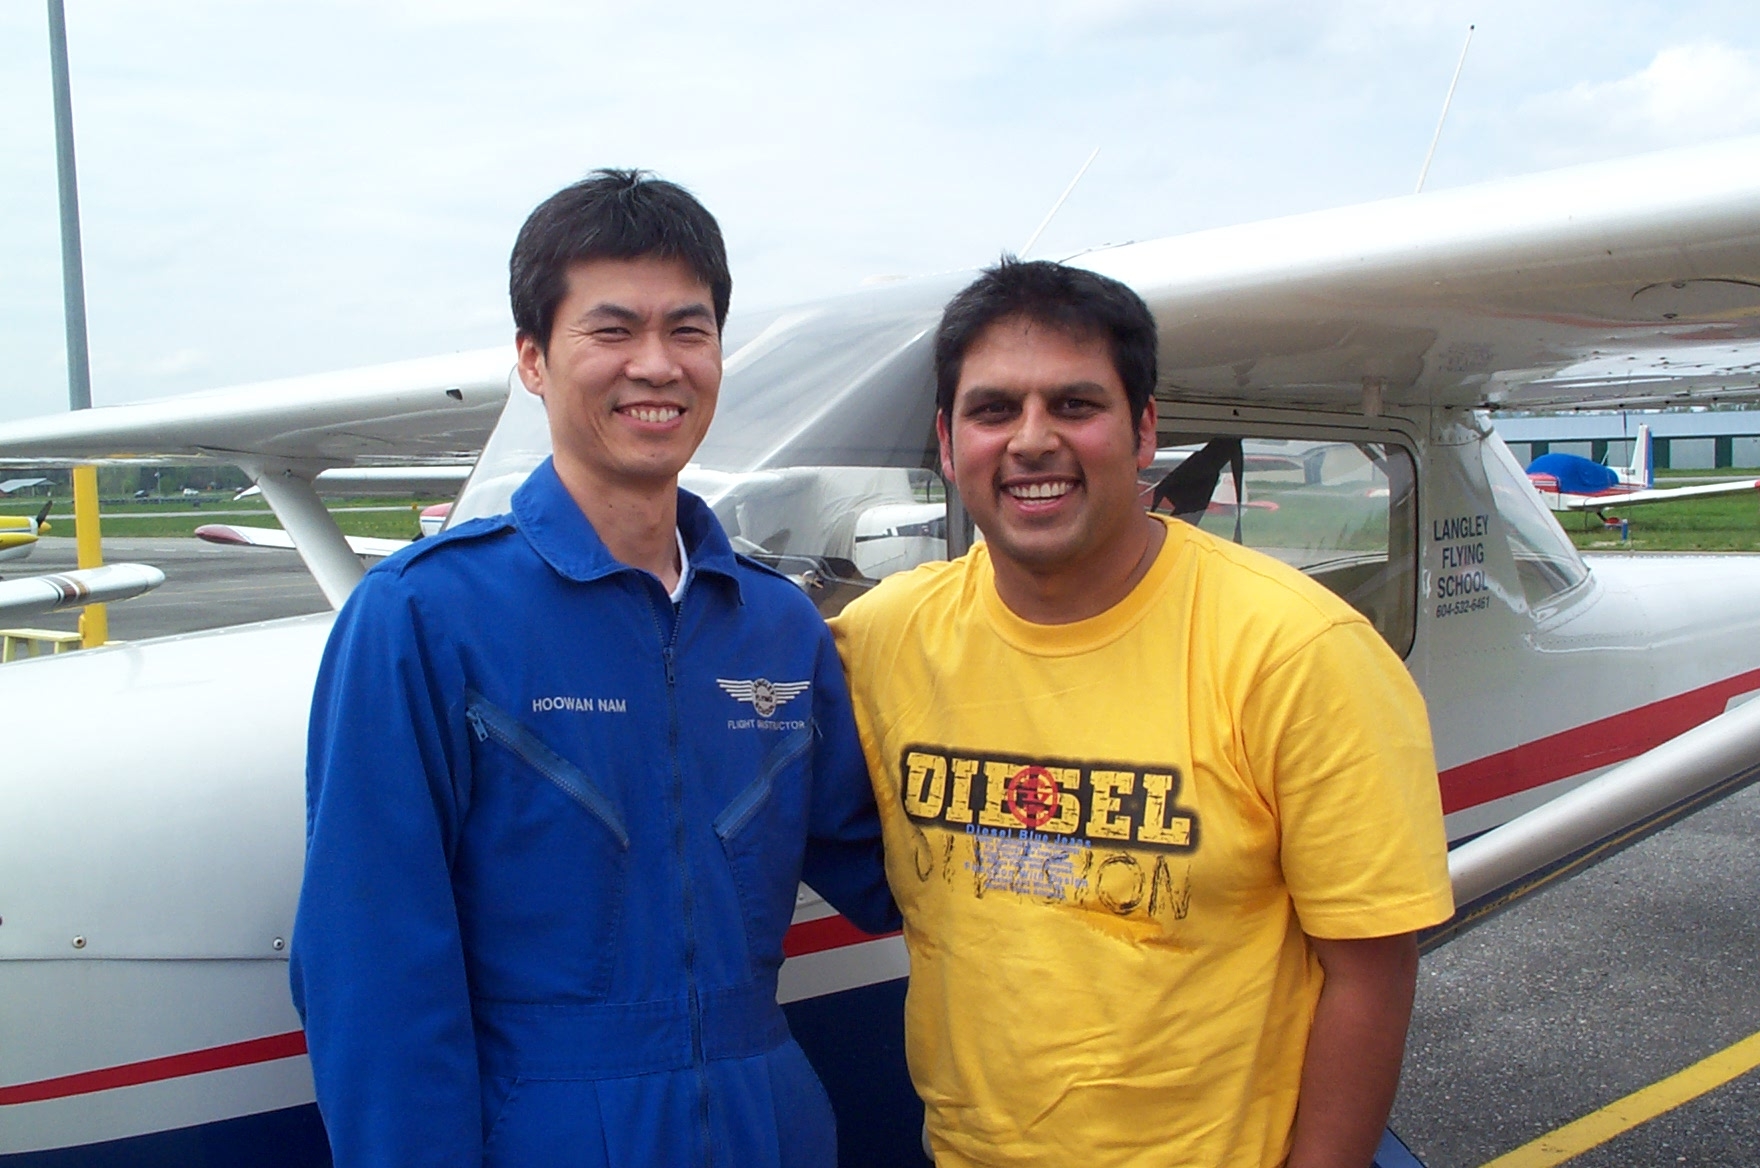 Michael Fernando with his Flight Instructor, Hoowan Nam, after the completion of Michael's First Solo Flight on April 23, 2010.  Langley Flying School.